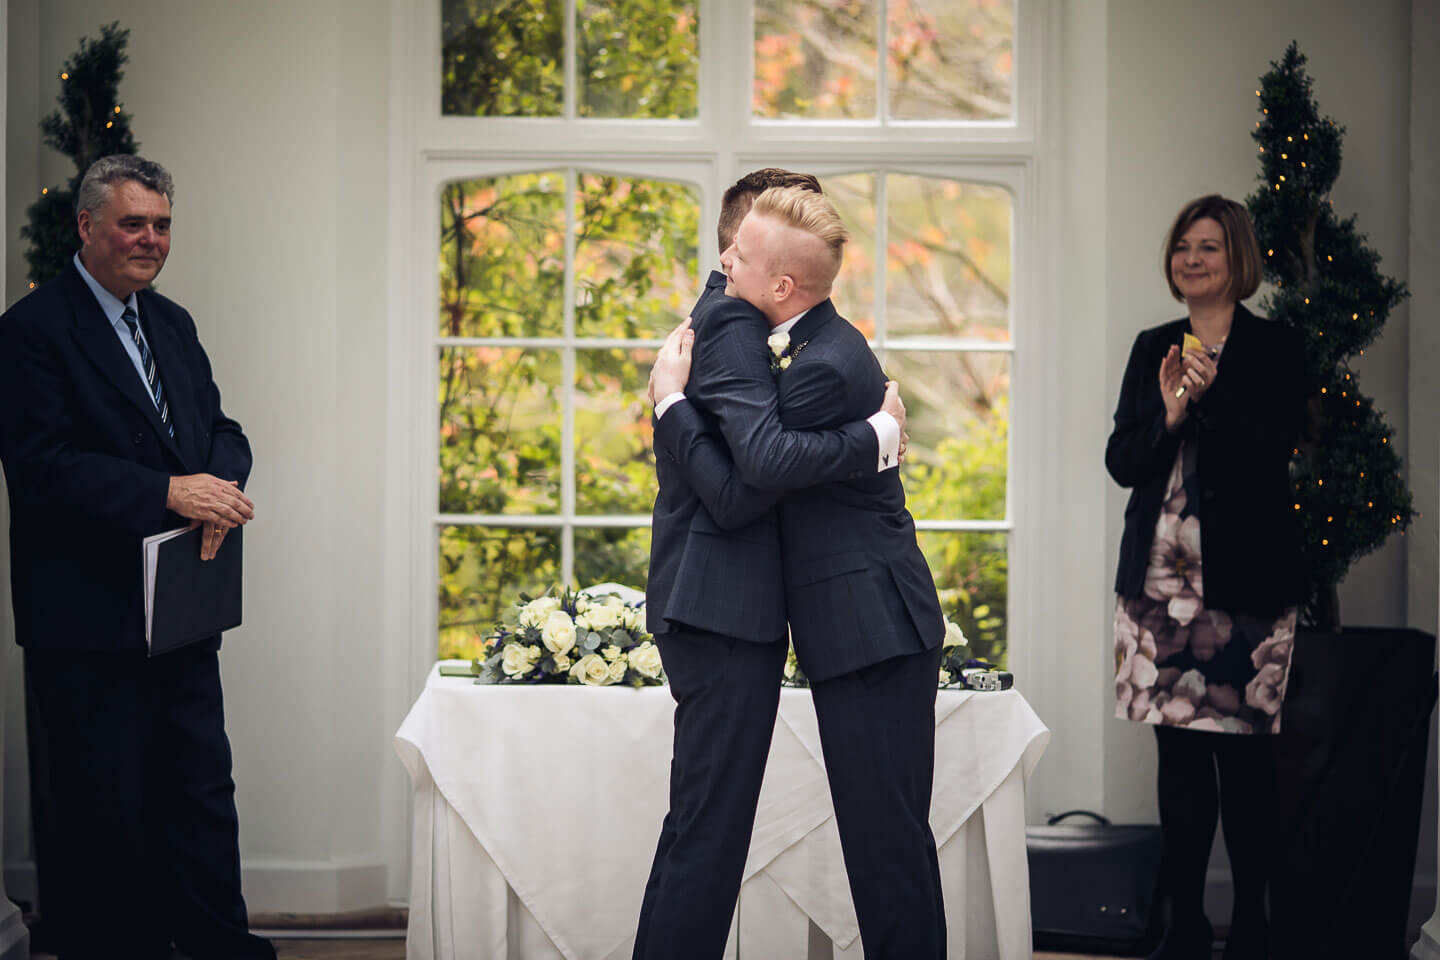 Sam and Kyles gay wedding photos kiss after vows image copyright Shooting Pixels featured on The Gay Wedding Guide 3 5